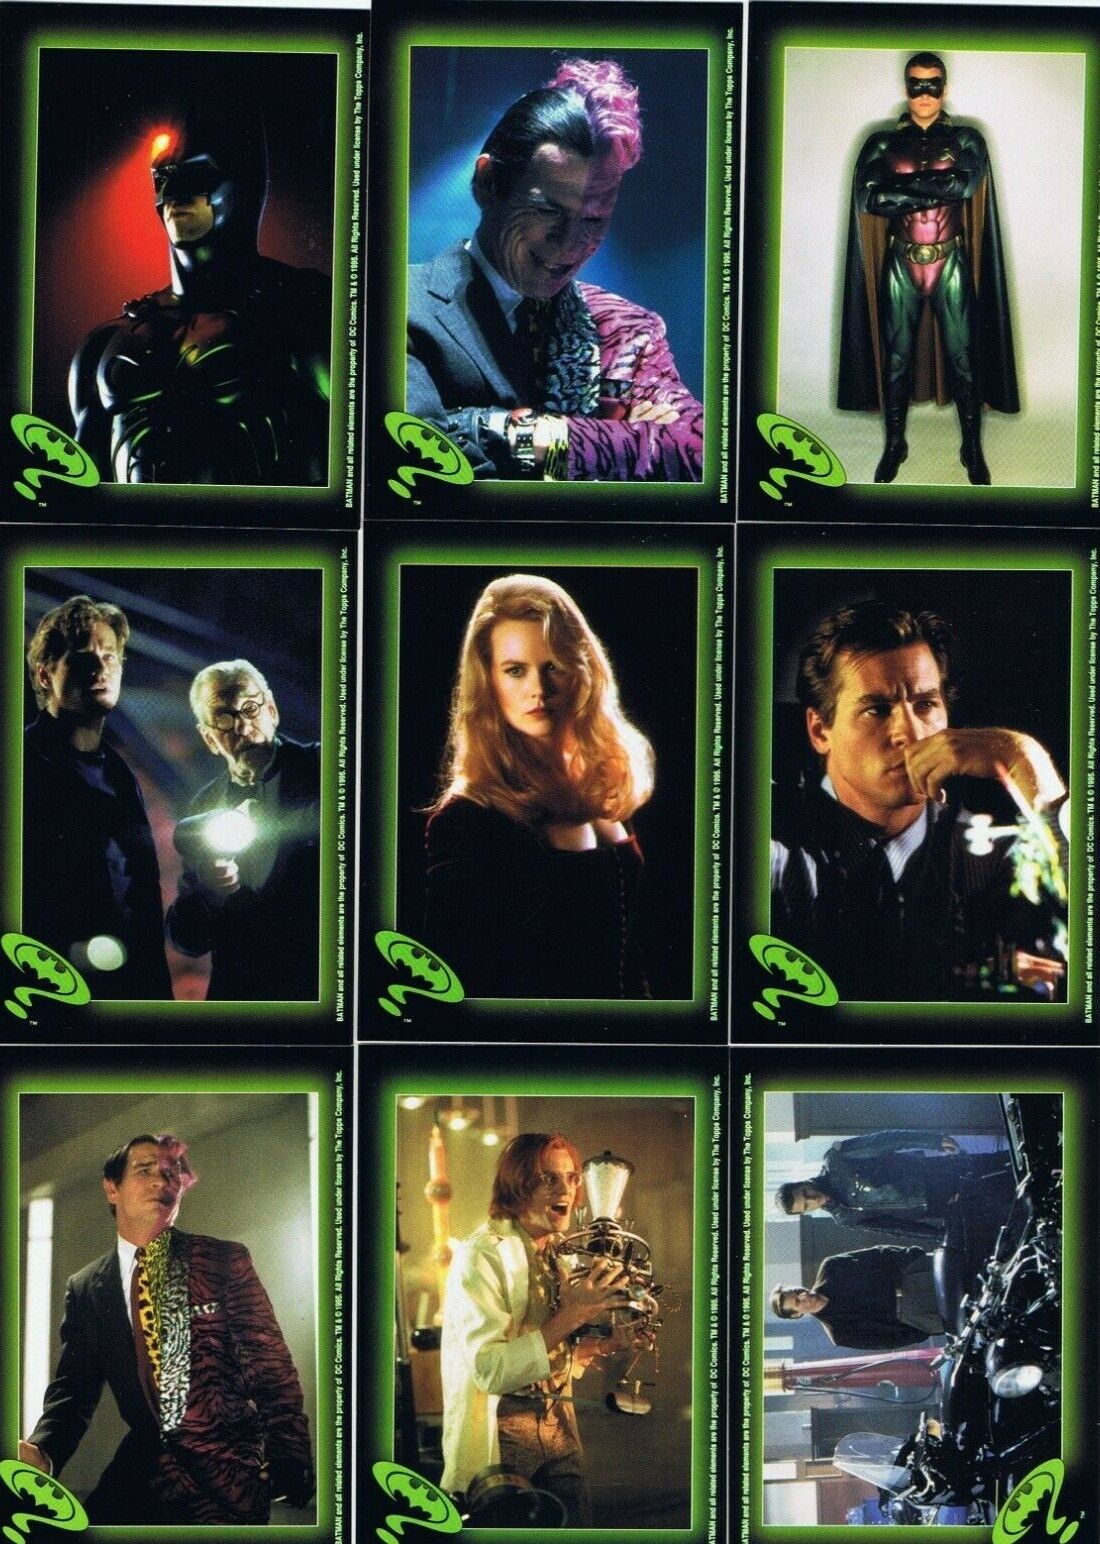 Batman Forever Stickers Topps 1995 Singles. Check List. $1each+Discounts+Inserts